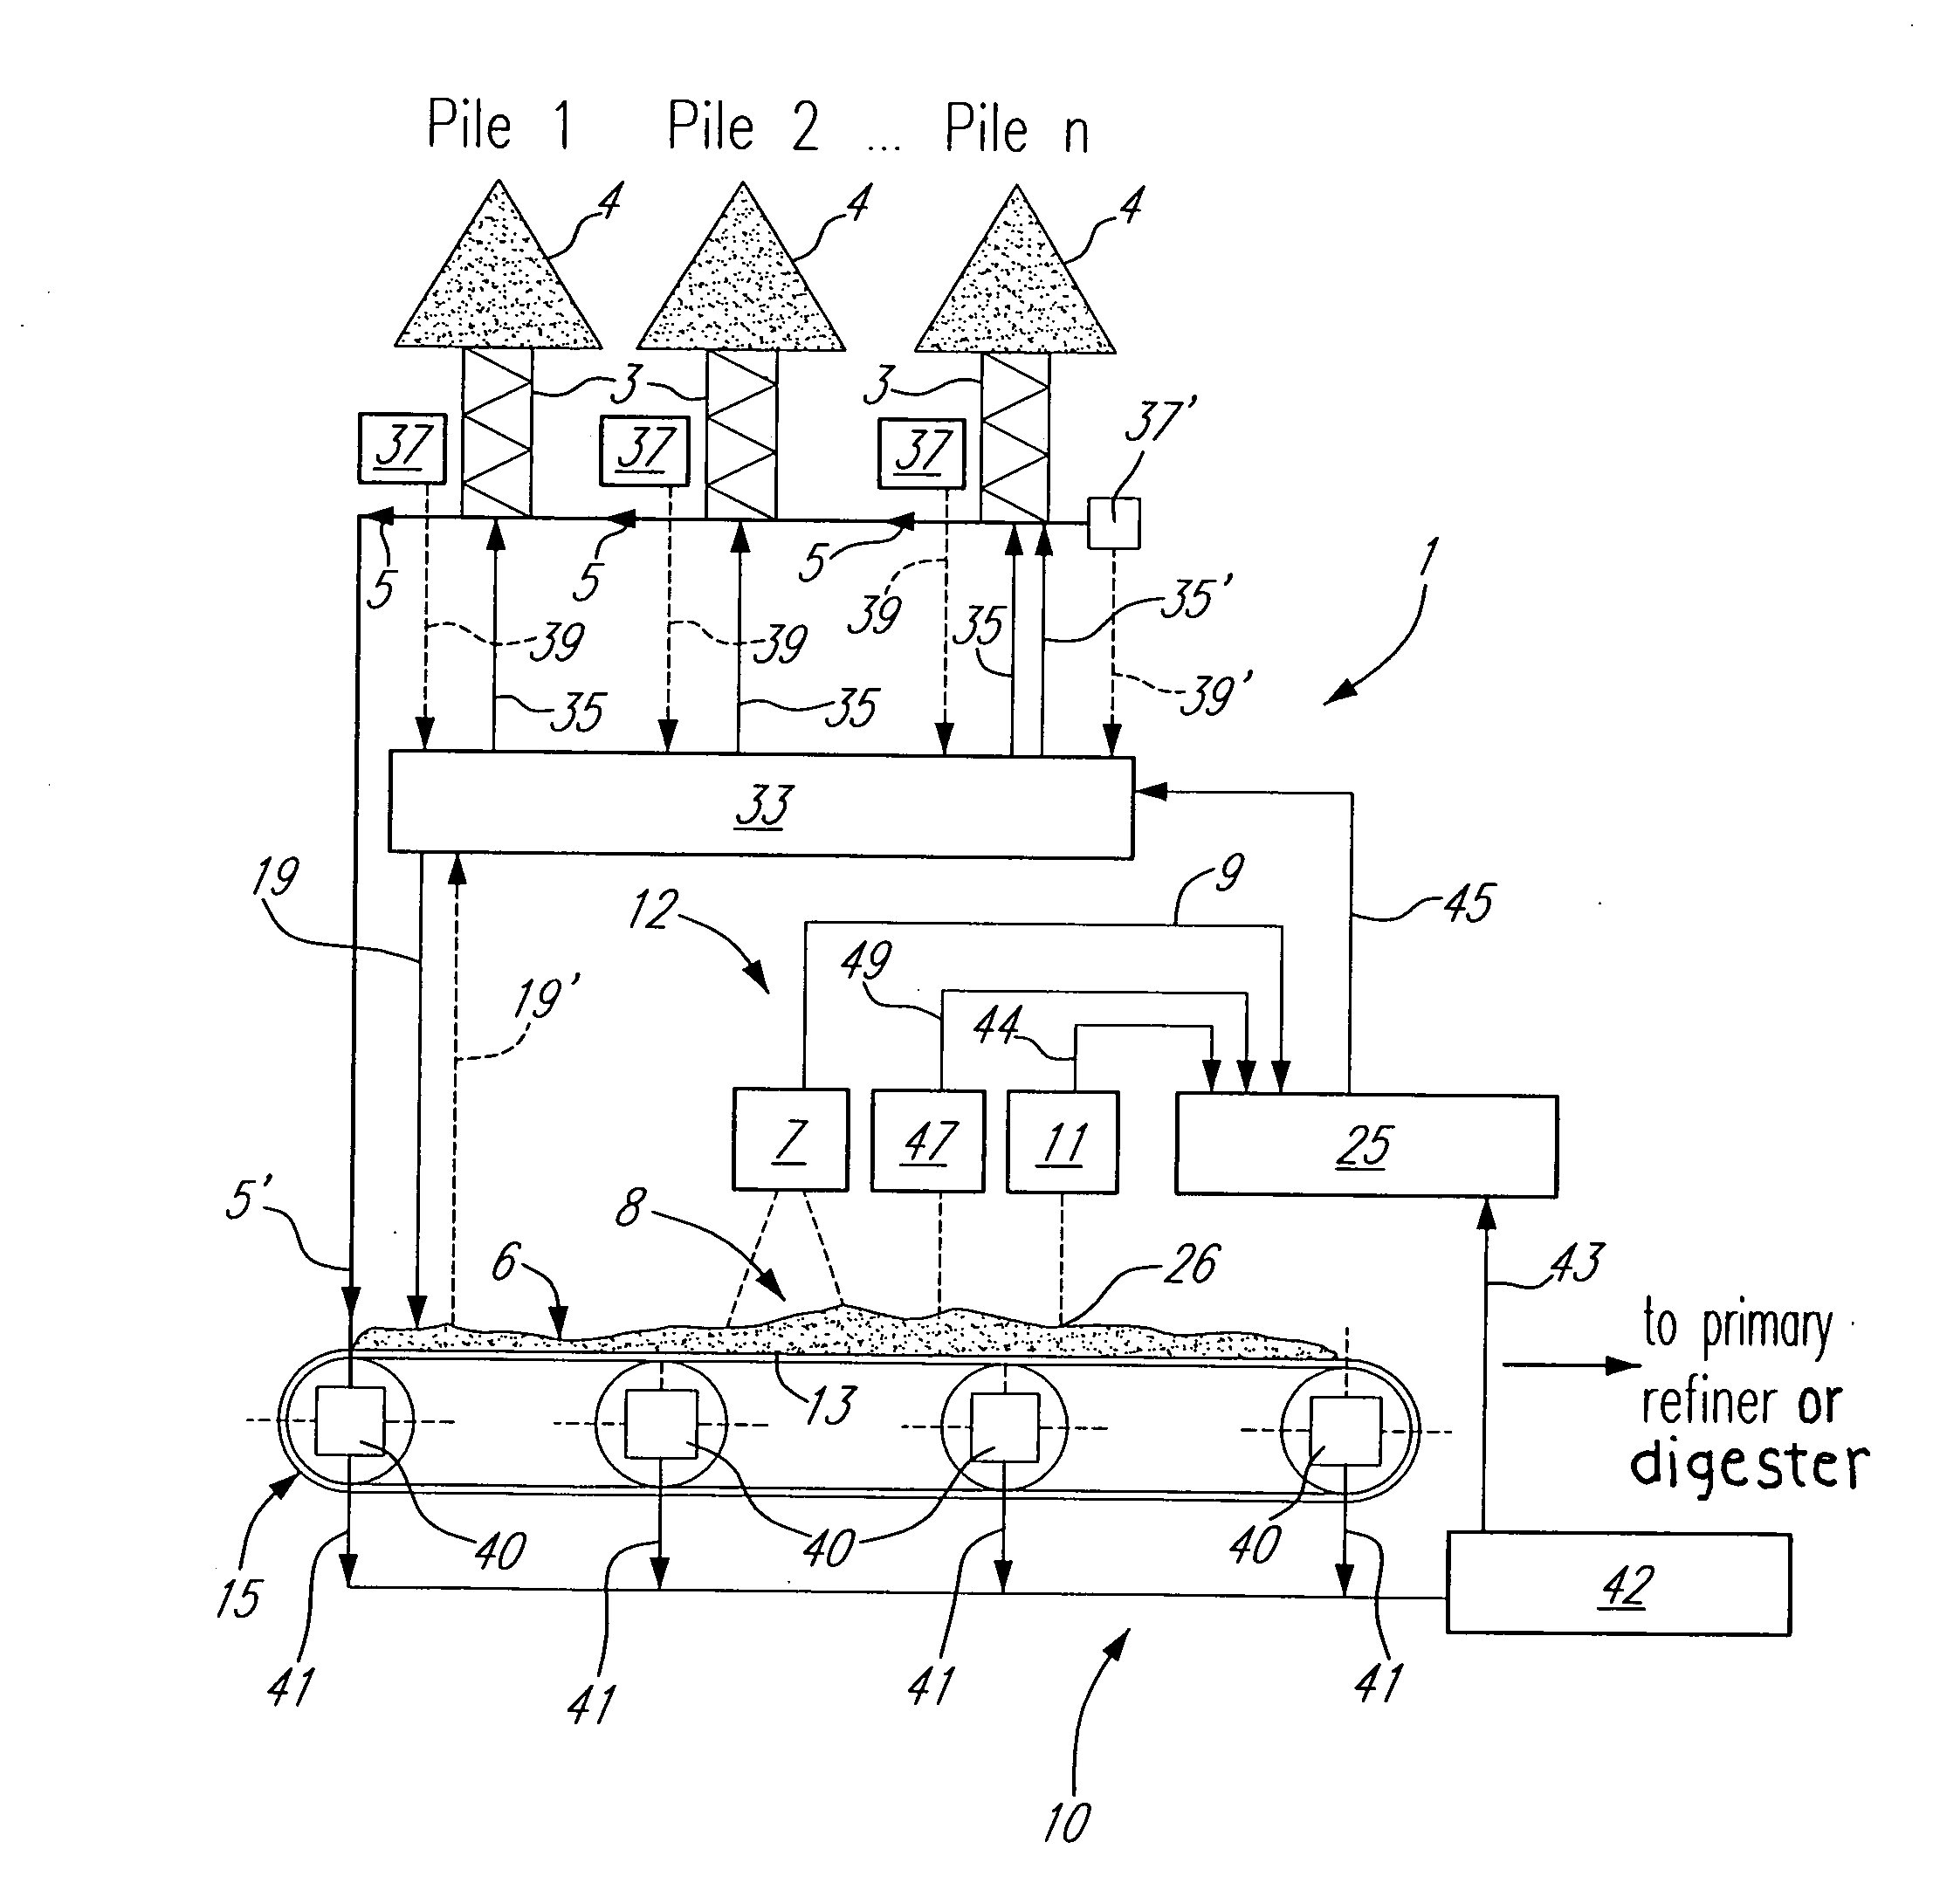 Method and apparatus for estimating relative proportion of wood chips species to be fed to a process for producing pulp